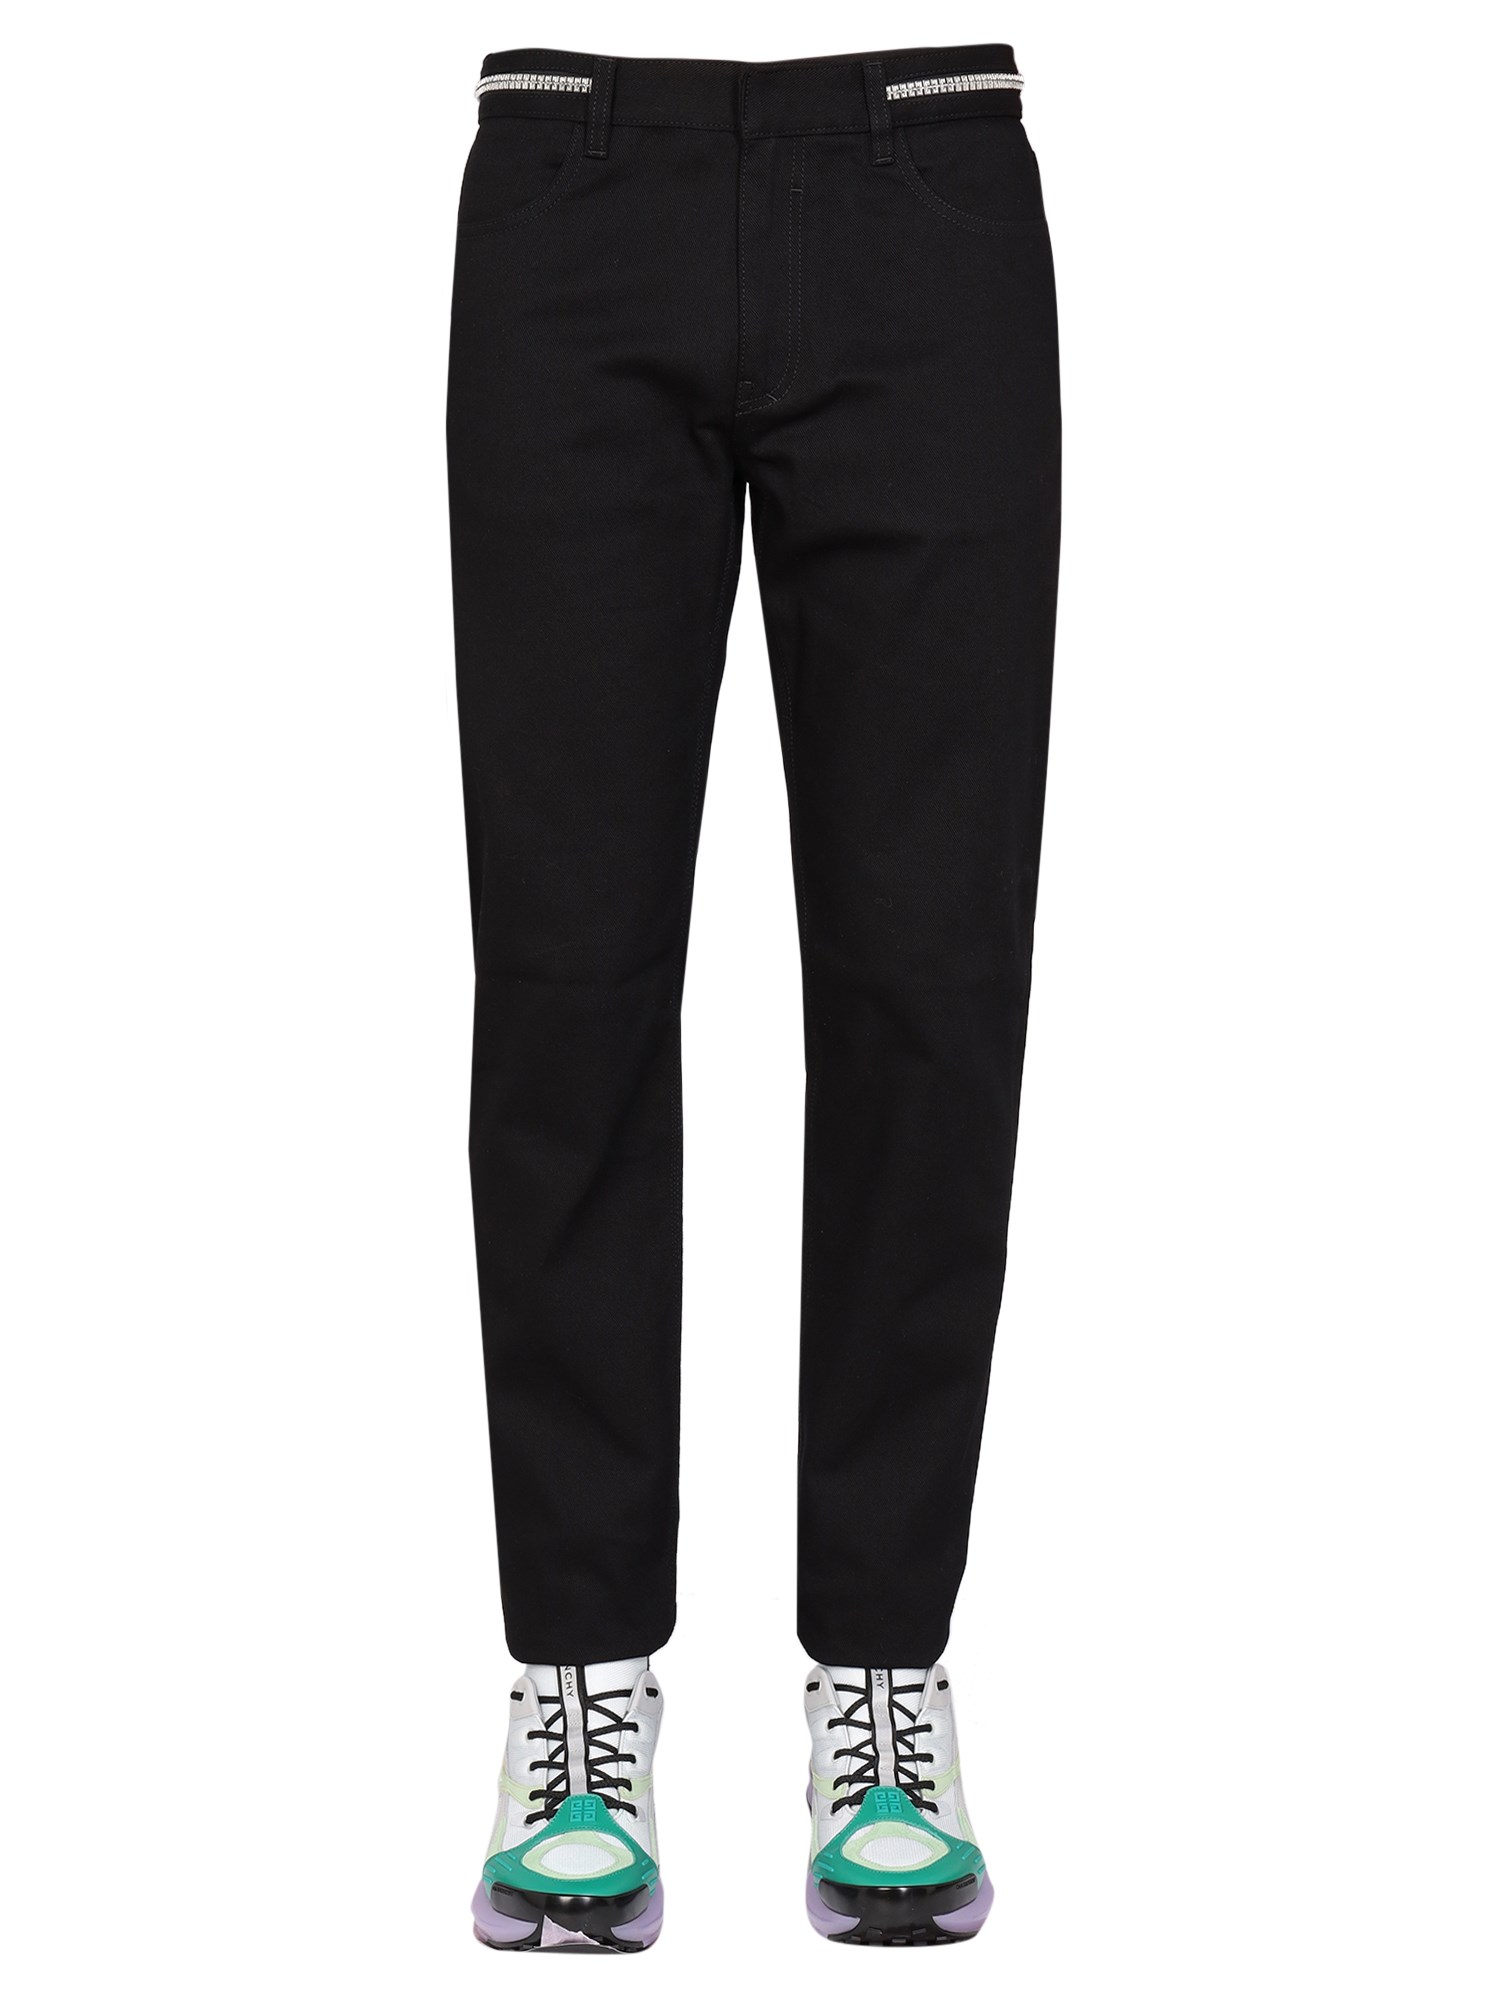 Givenchy Slim Fit Jeans With Metallic Details In Black